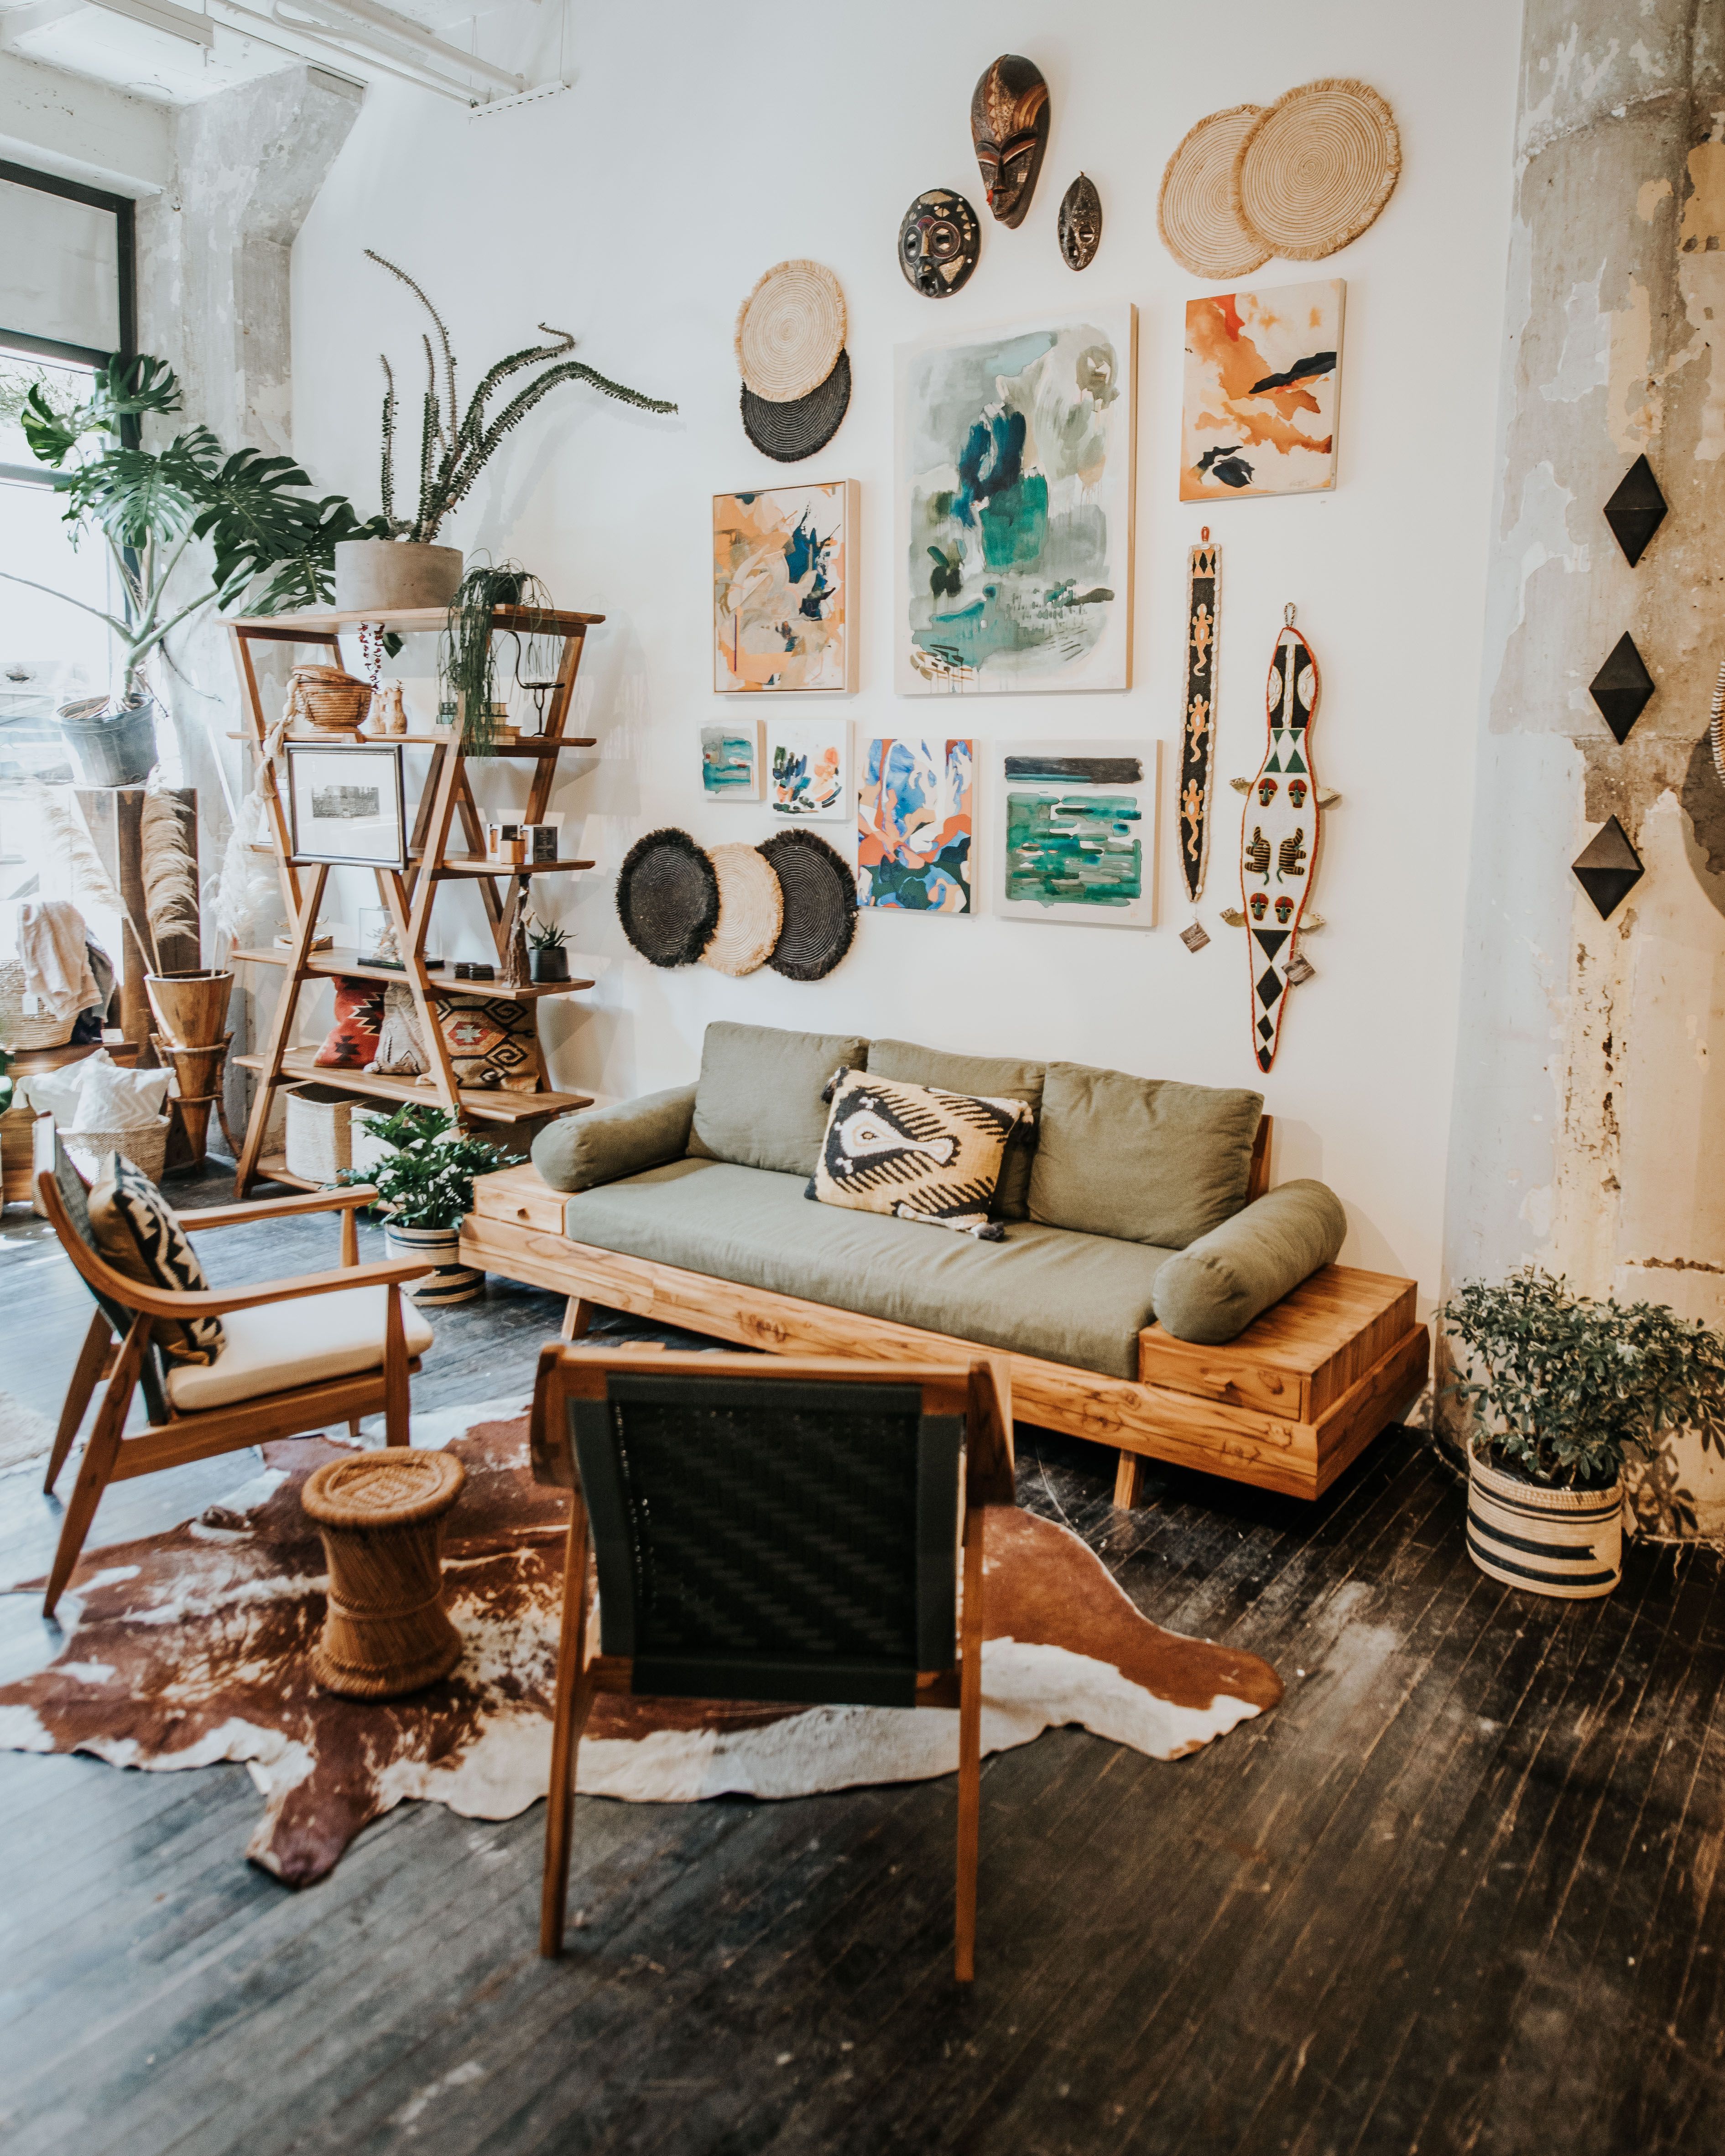 This Home Goods Store Spotlights Makers